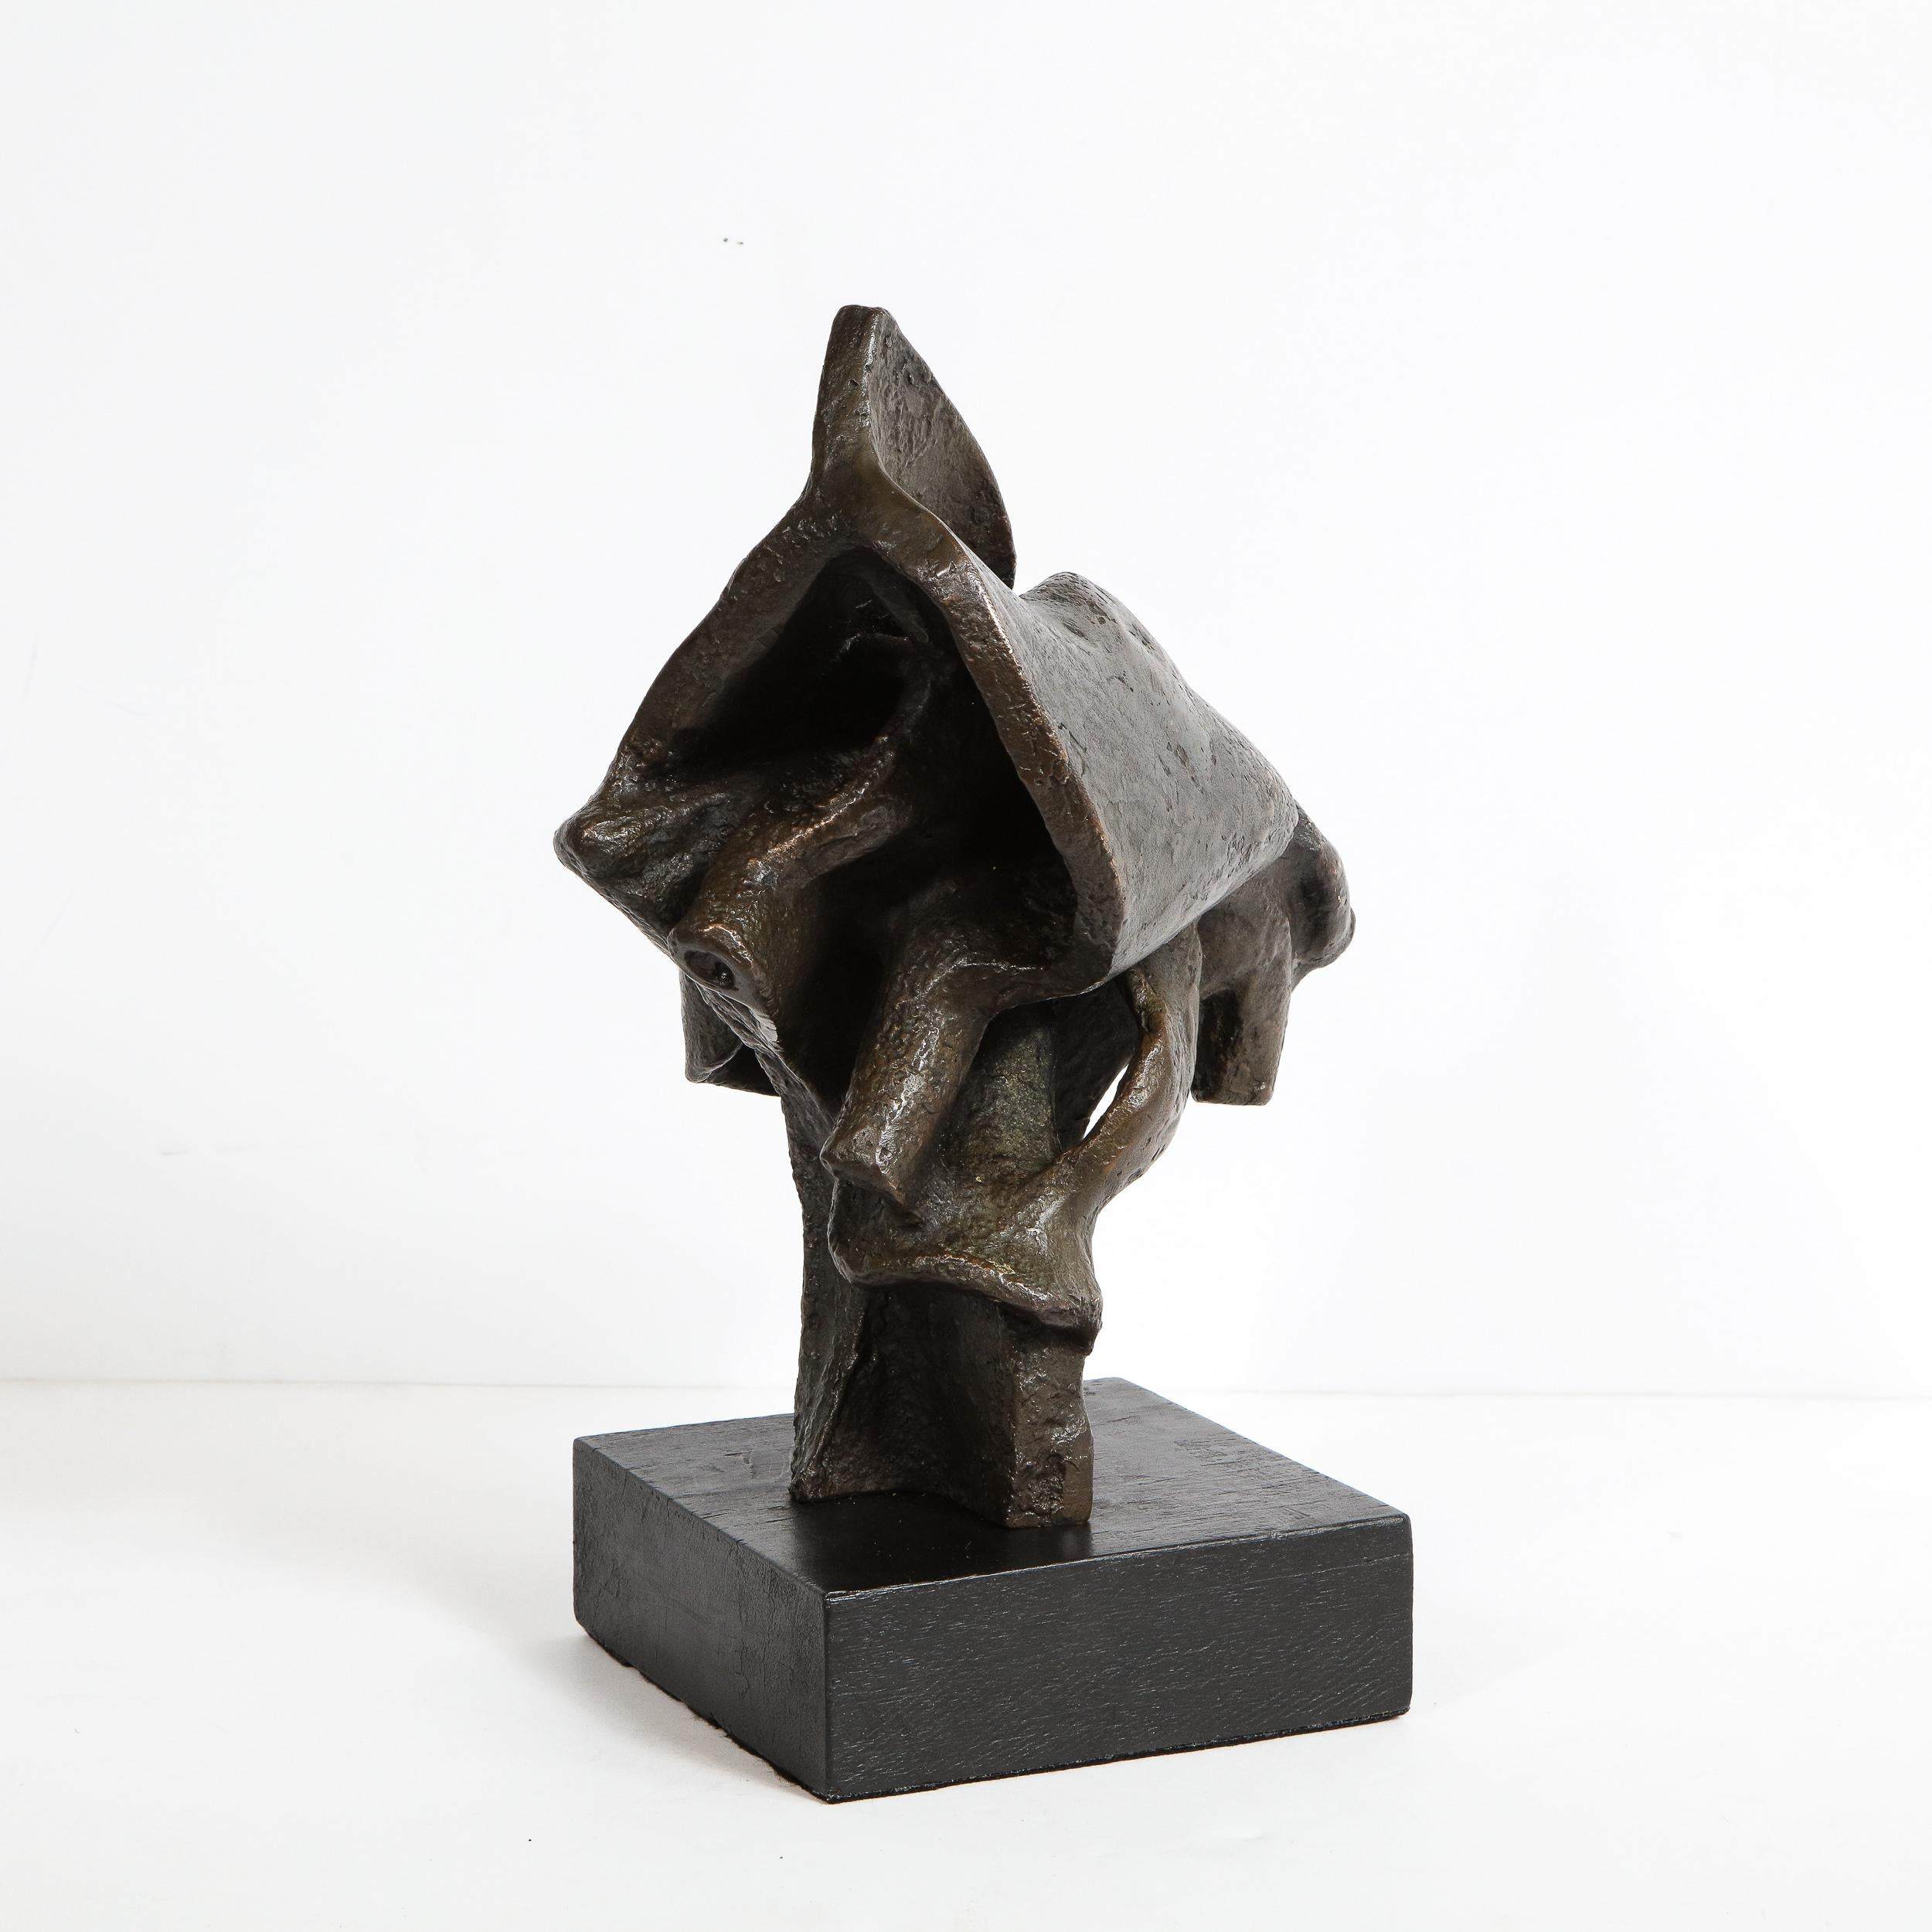 This sophisticated Mid-Century Modern sculpture was realized in 1960. Presented on a volumetric rectangular ebonized wood base, the piece features an abundance of intermingling organic curvilinear forms, full of verve and dynamism. While the piece